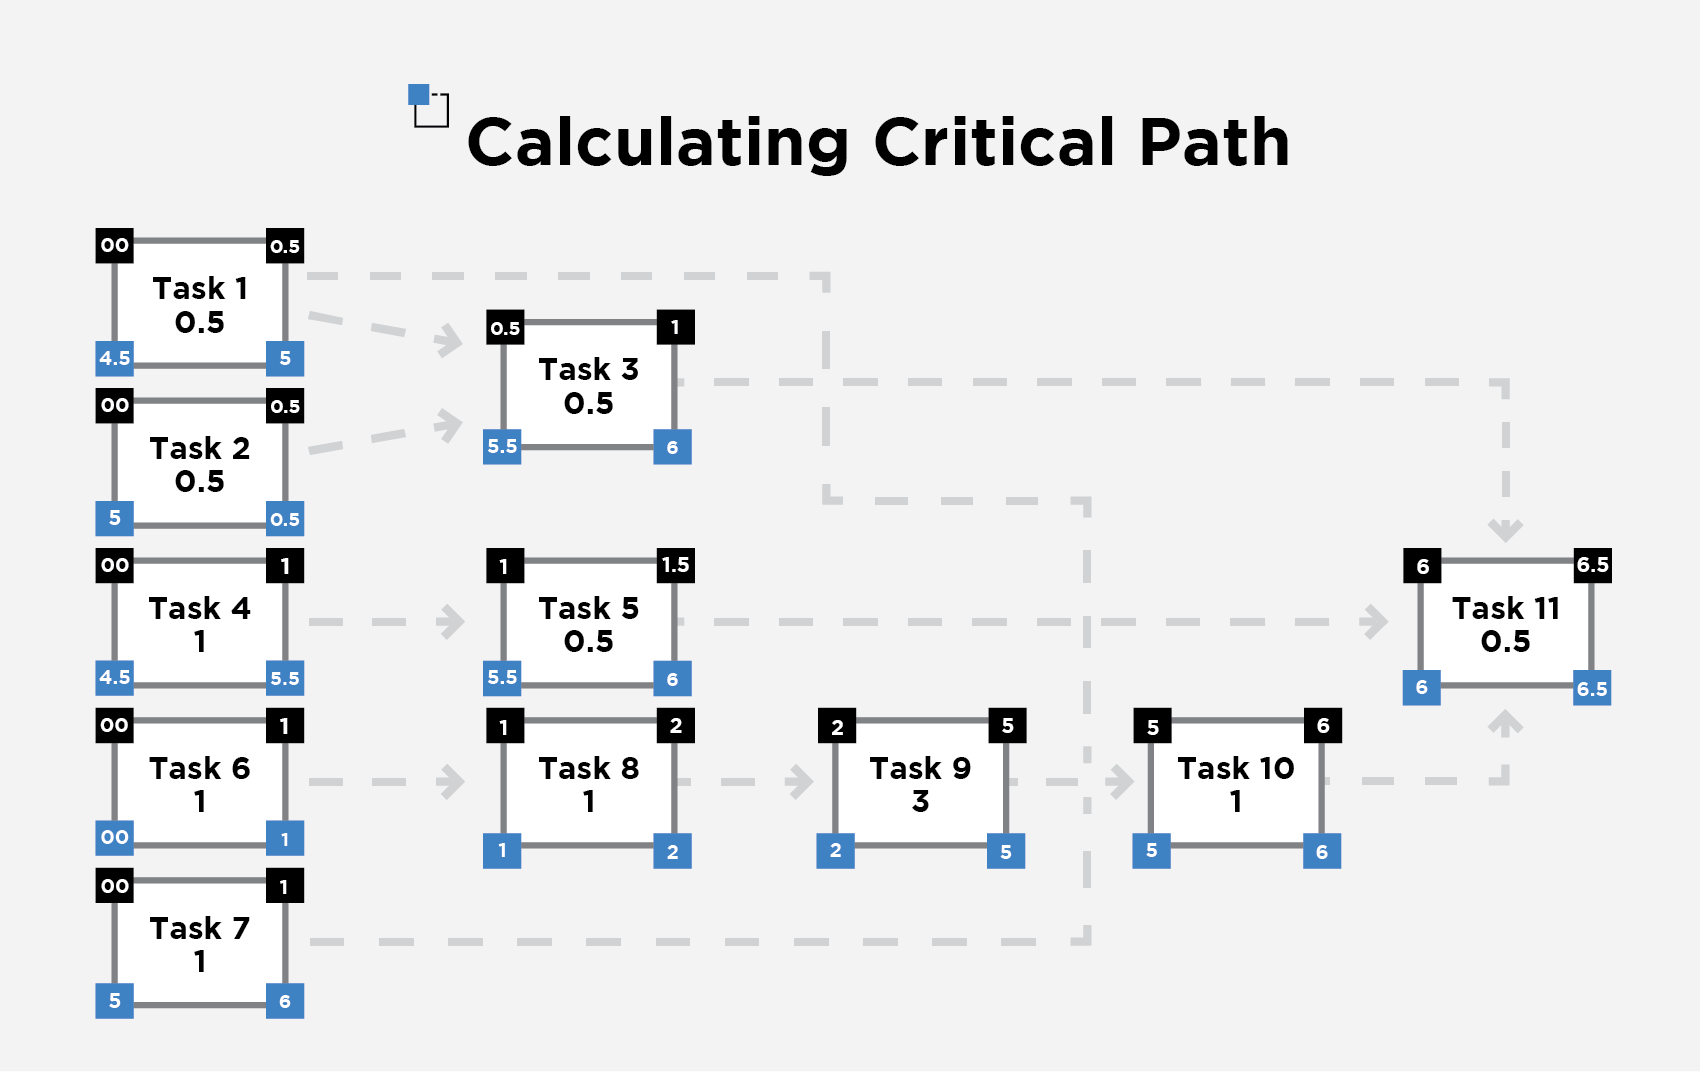 Flow chart mapping out critical path